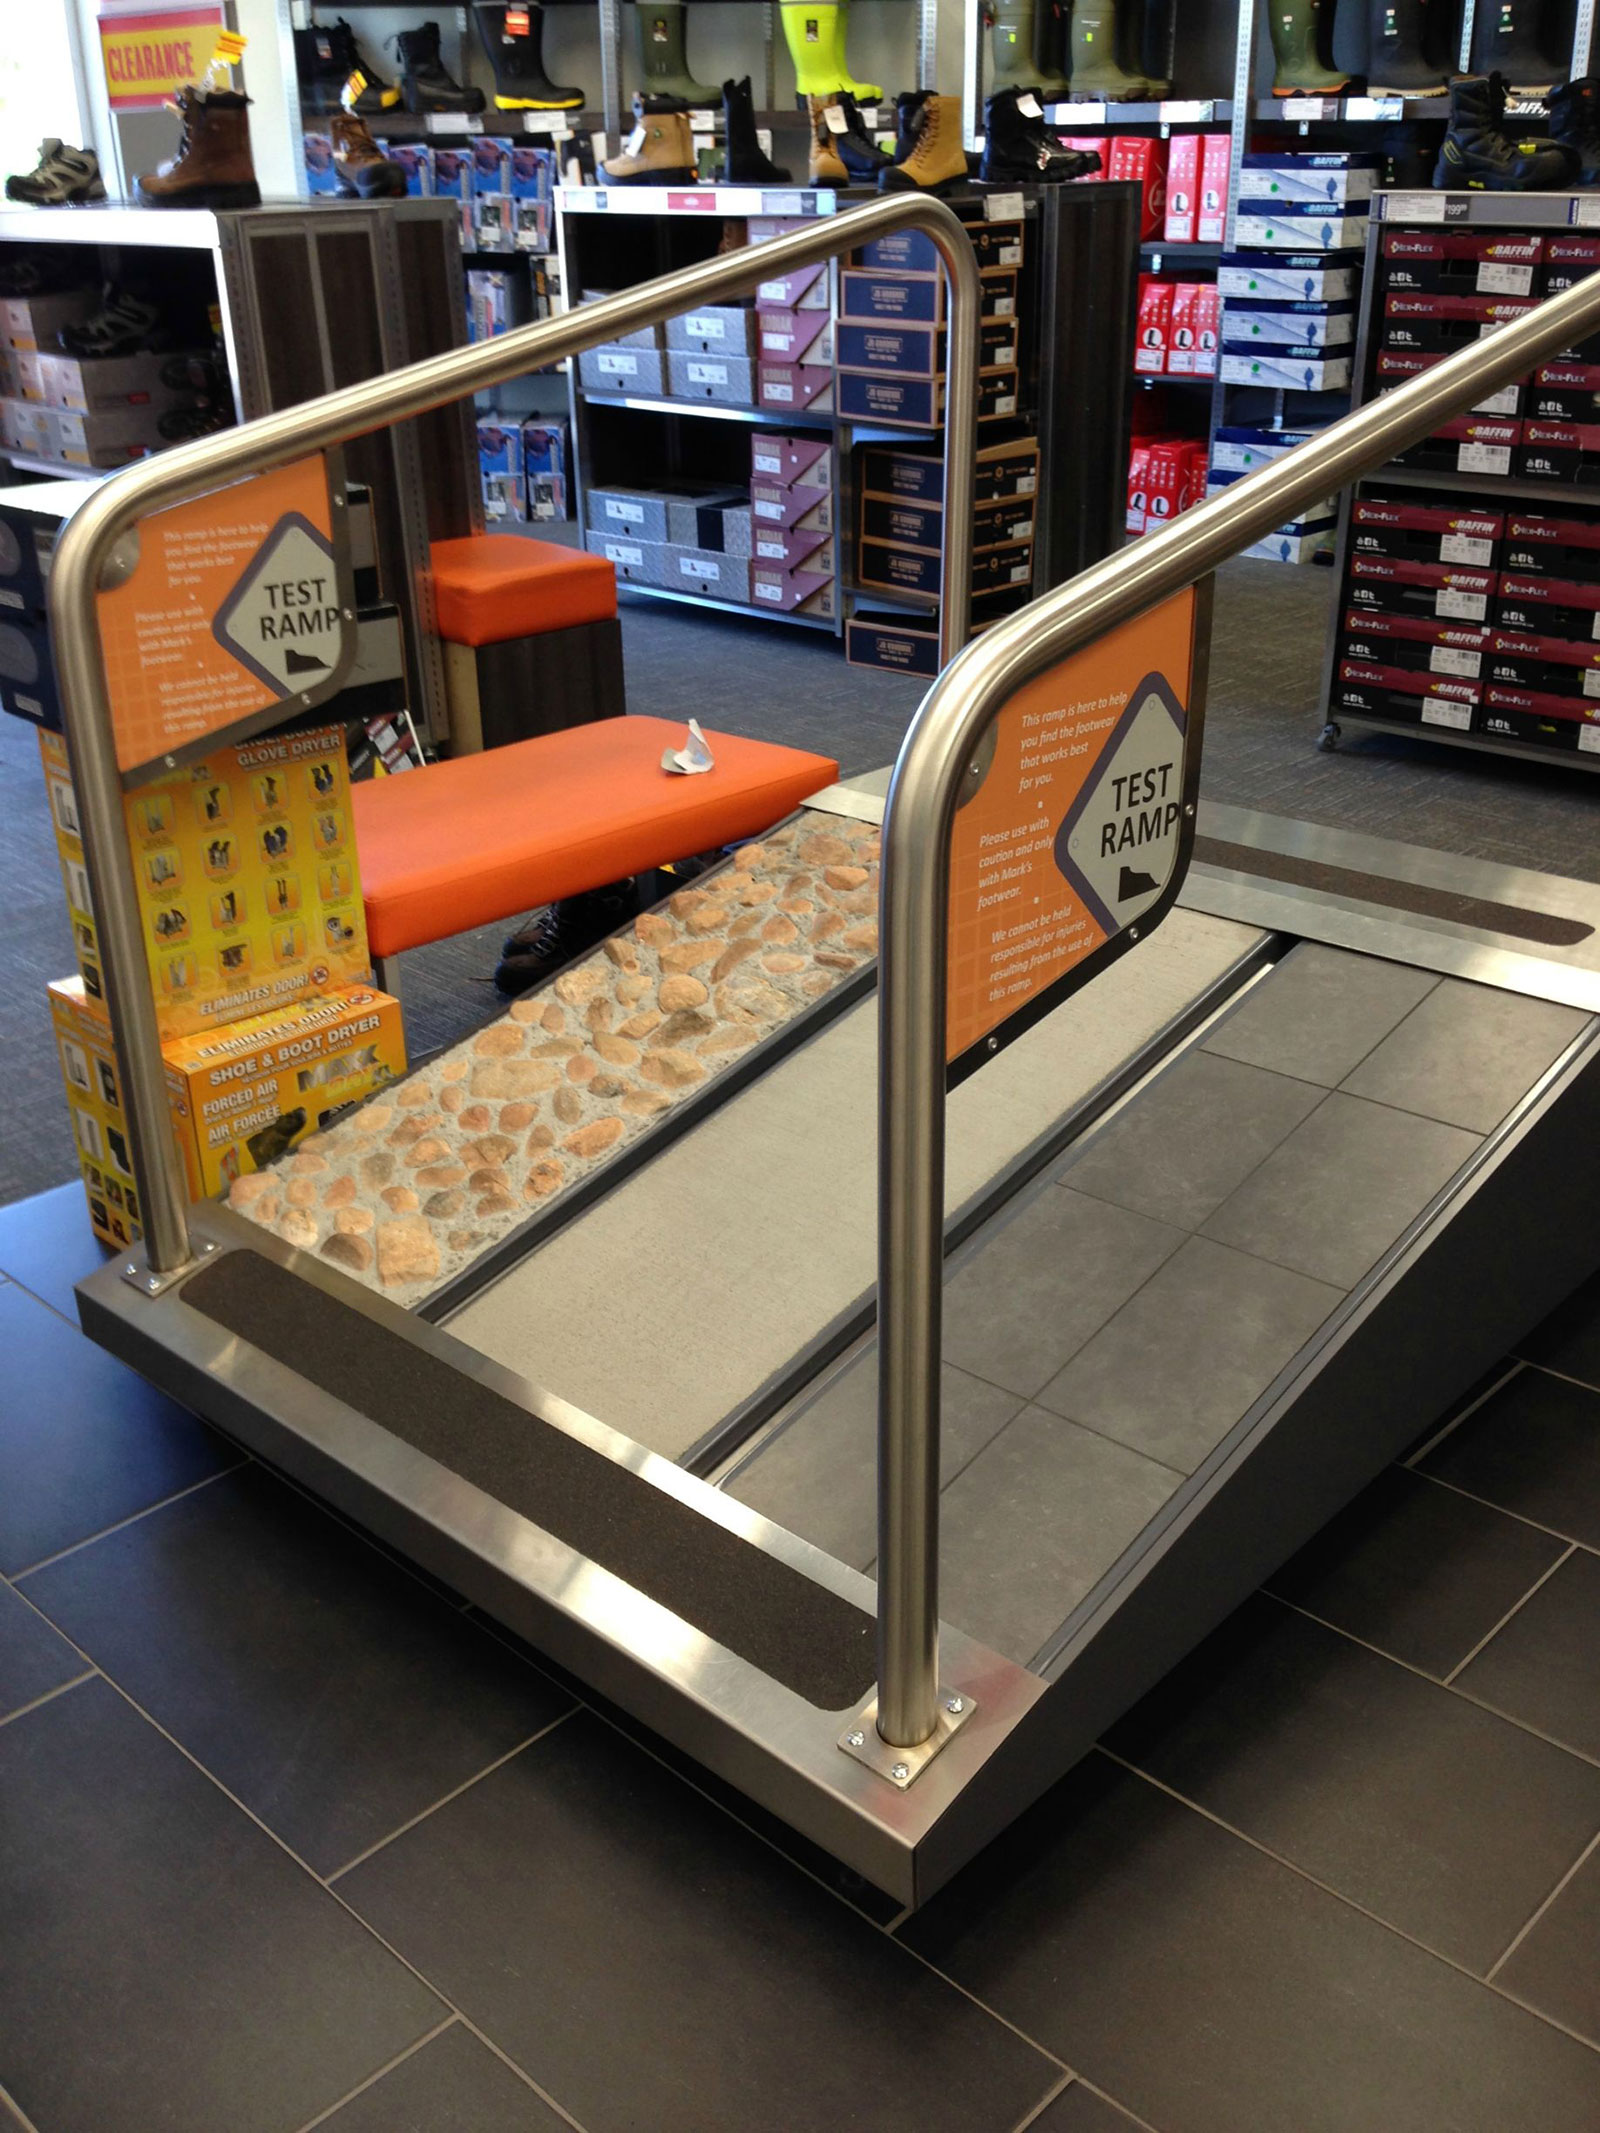 This store has a "test ramp" so you can try out your safety boots on different surfaces.